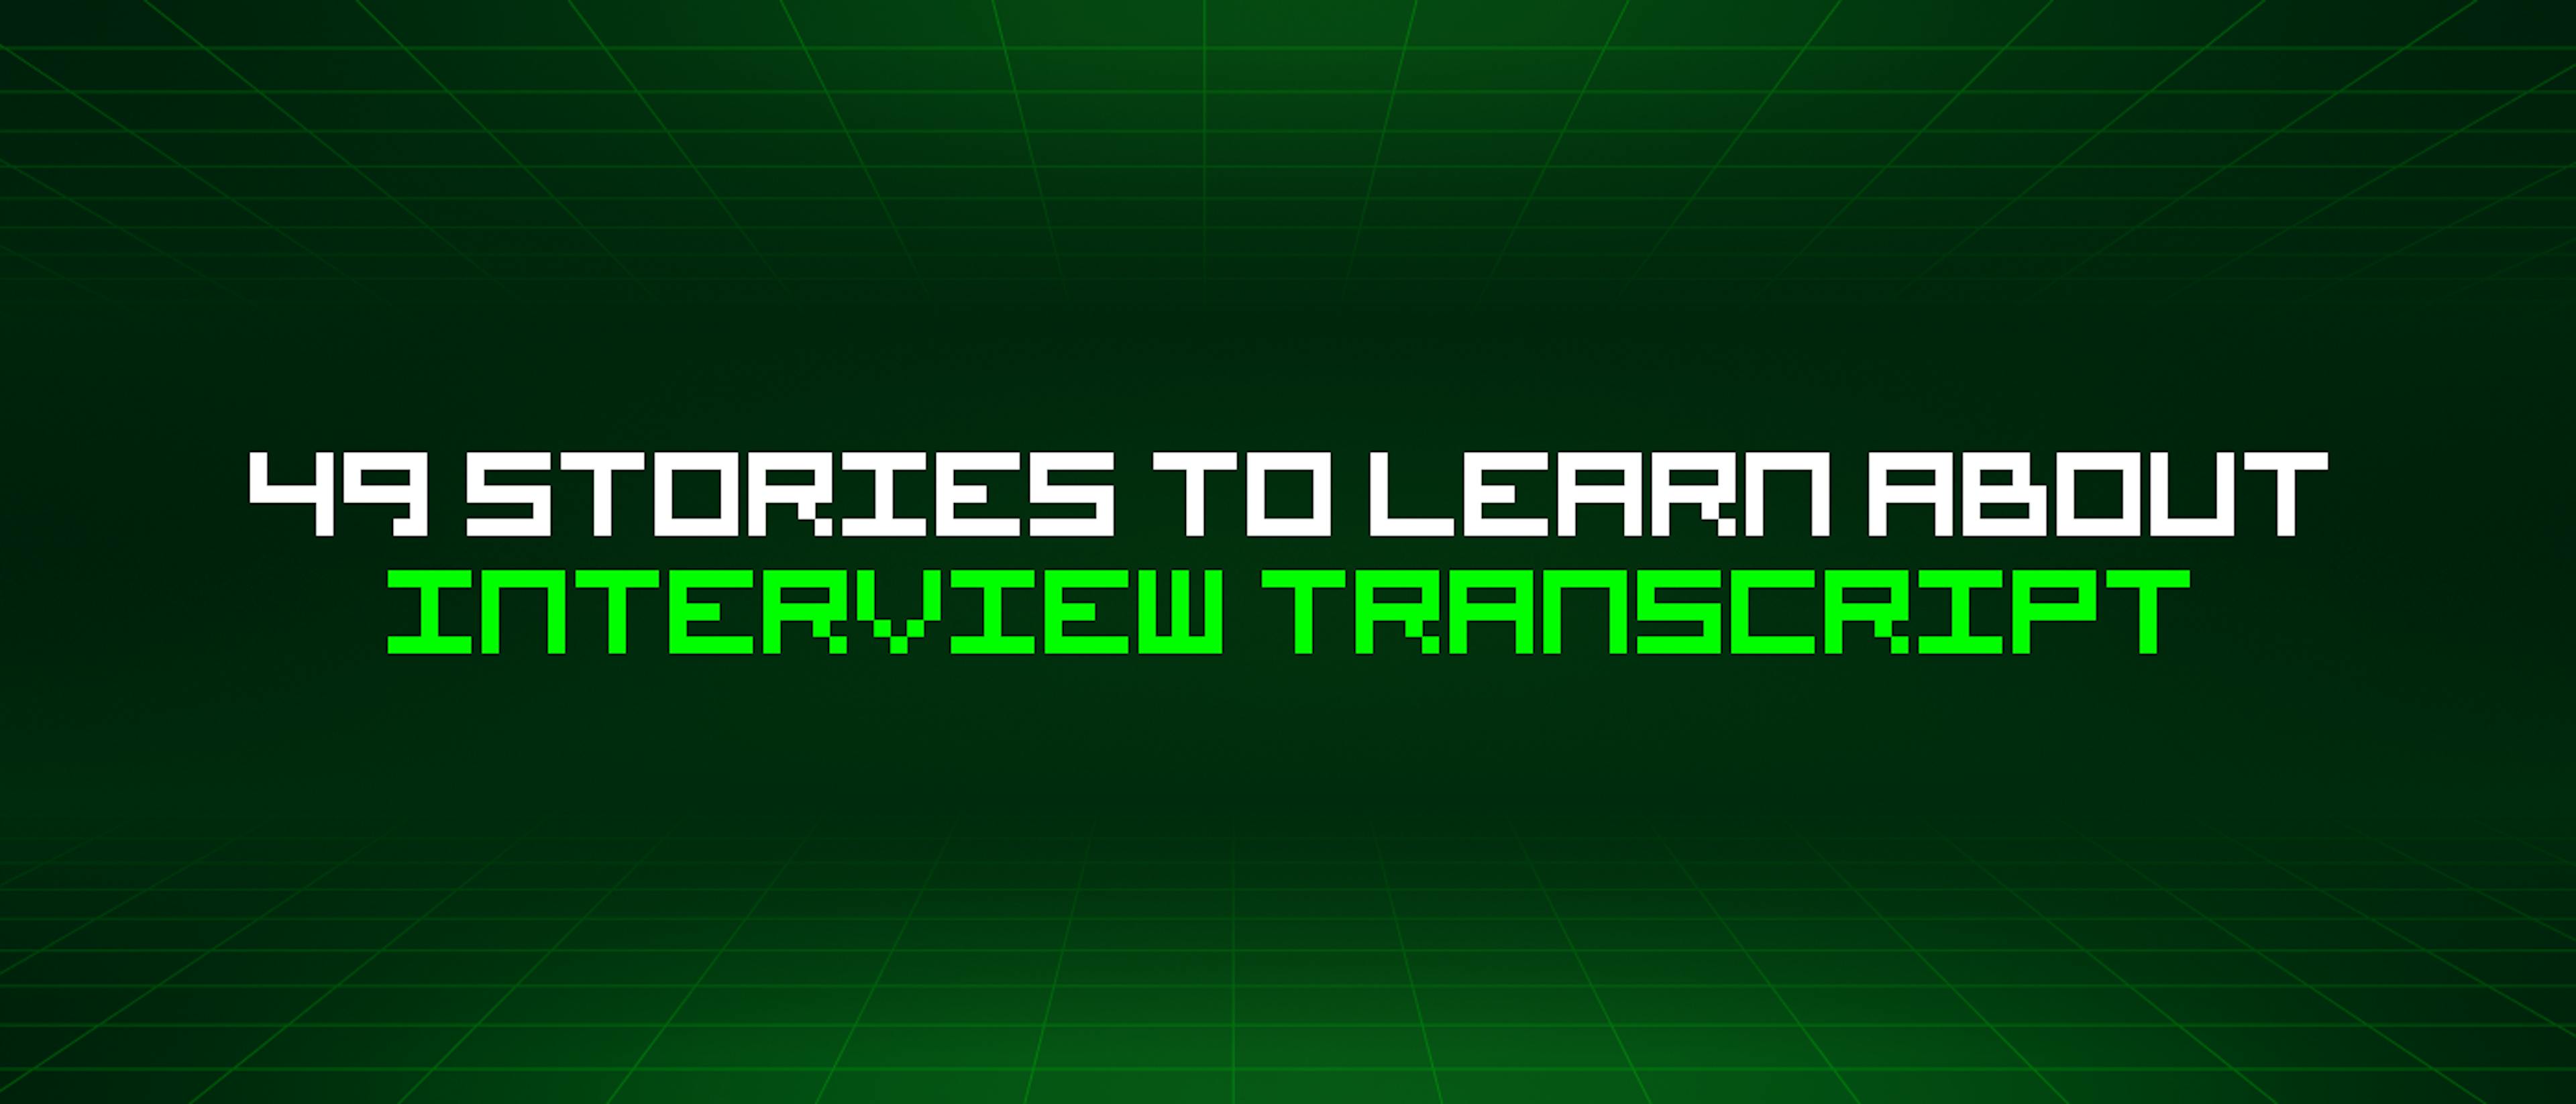 featured image - 49 Stories To Learn About Interview Transcript